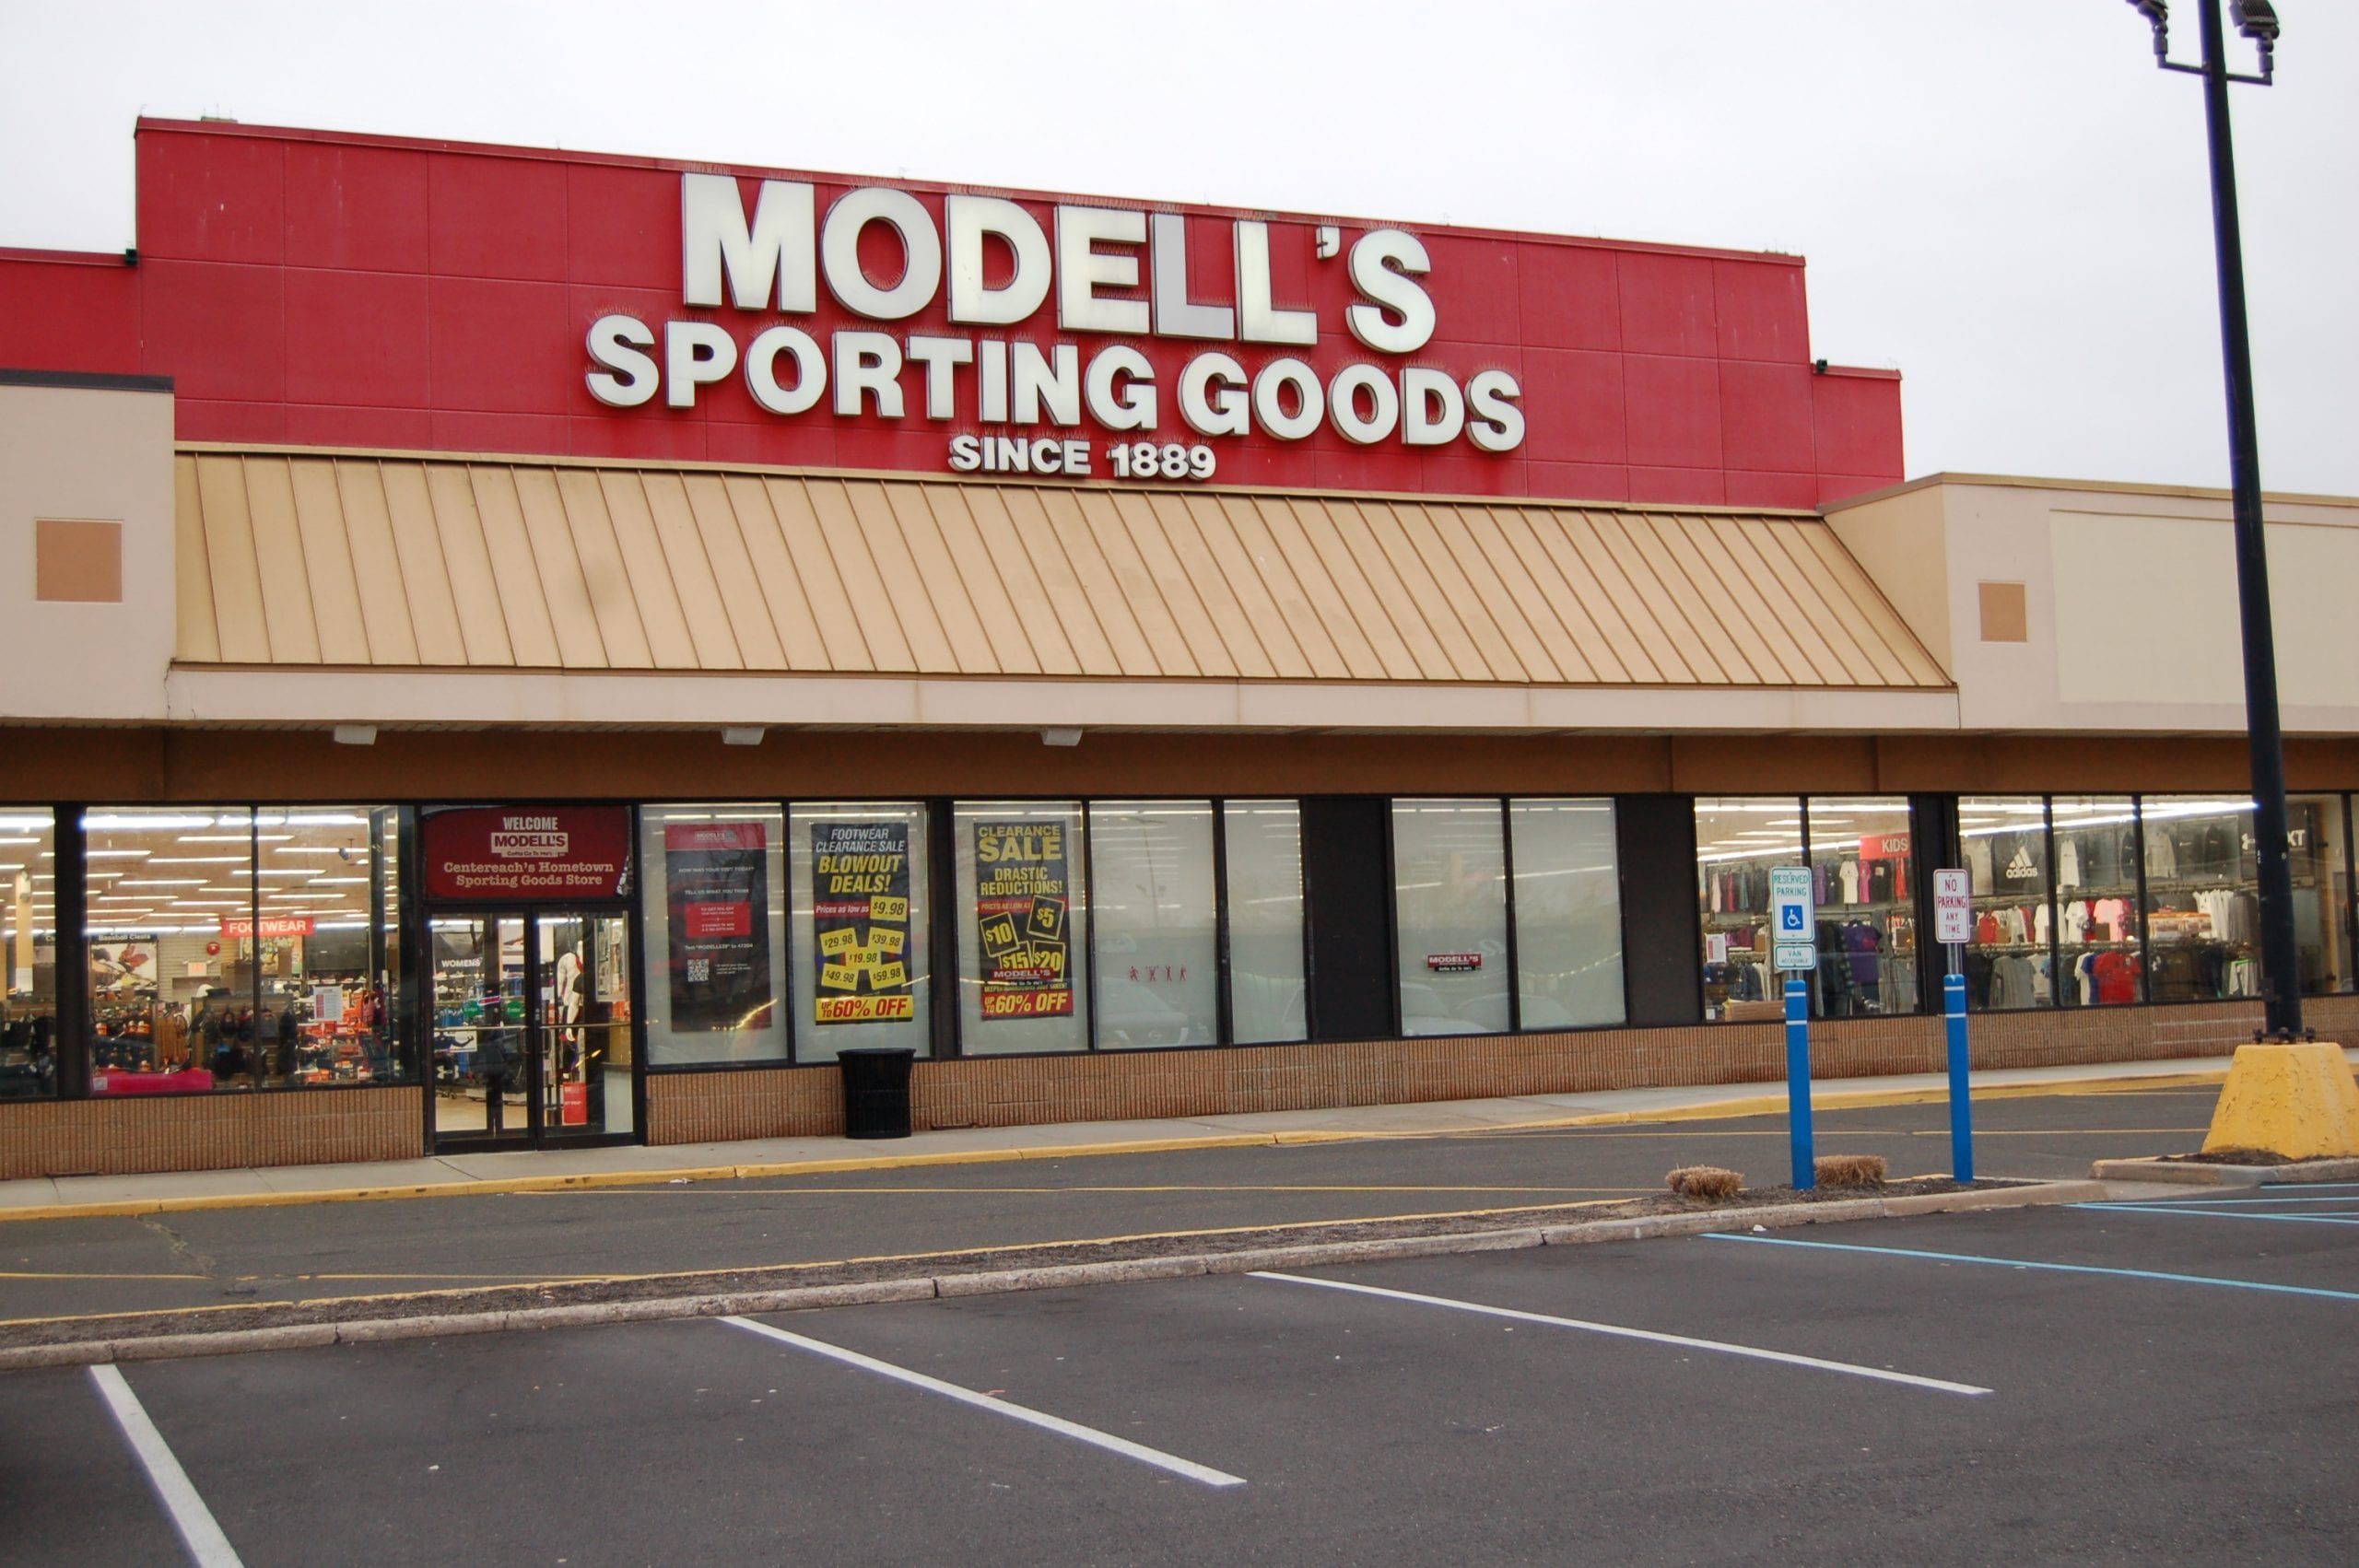 Modell’s Sporting Goods files for bankruptcy | TBR News Media